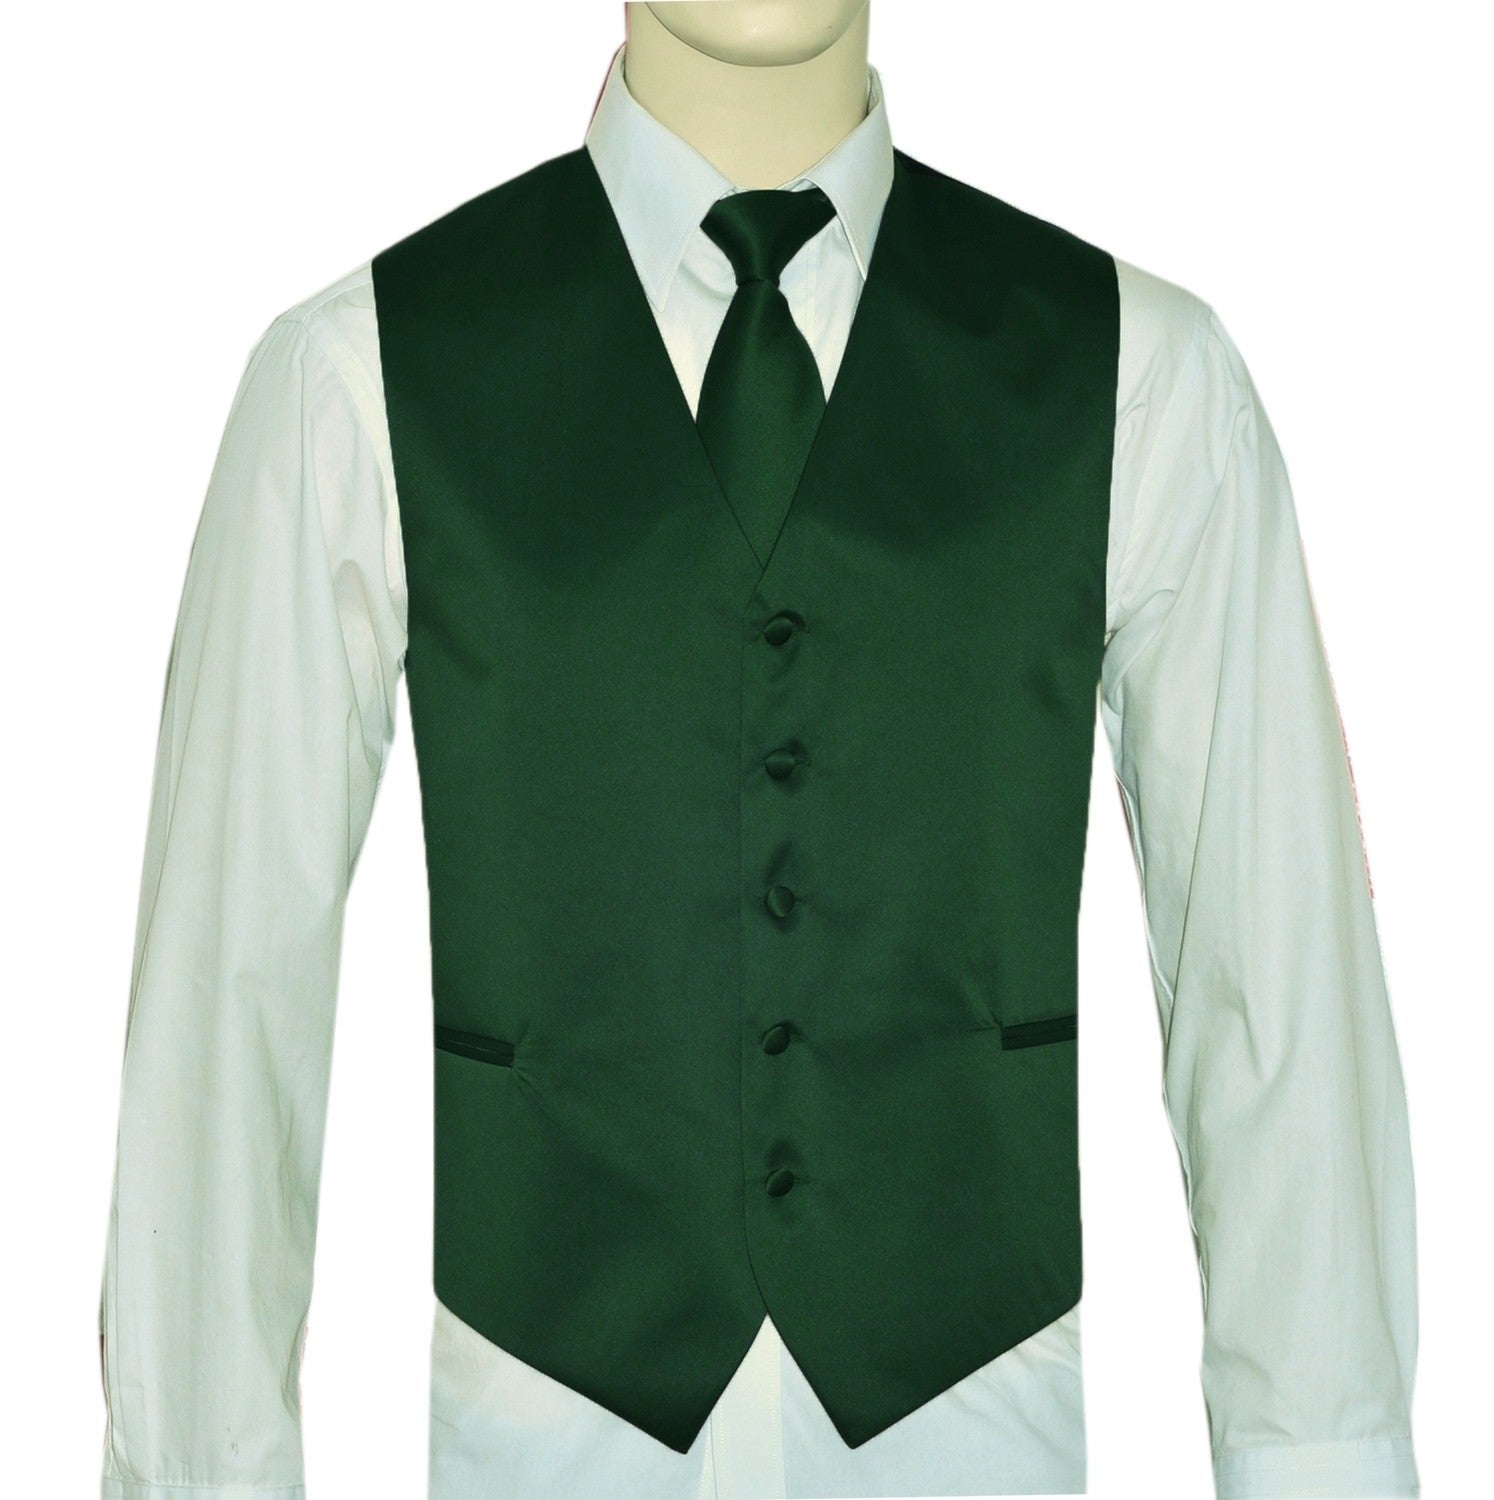 KCT Menswear Forest Green Vest and Tie Set, formal vest and tie set, groom and groomsmen vest and tie set, solid color vest and tie set, formal wear vest and tie set, special occasion vest and tie set.